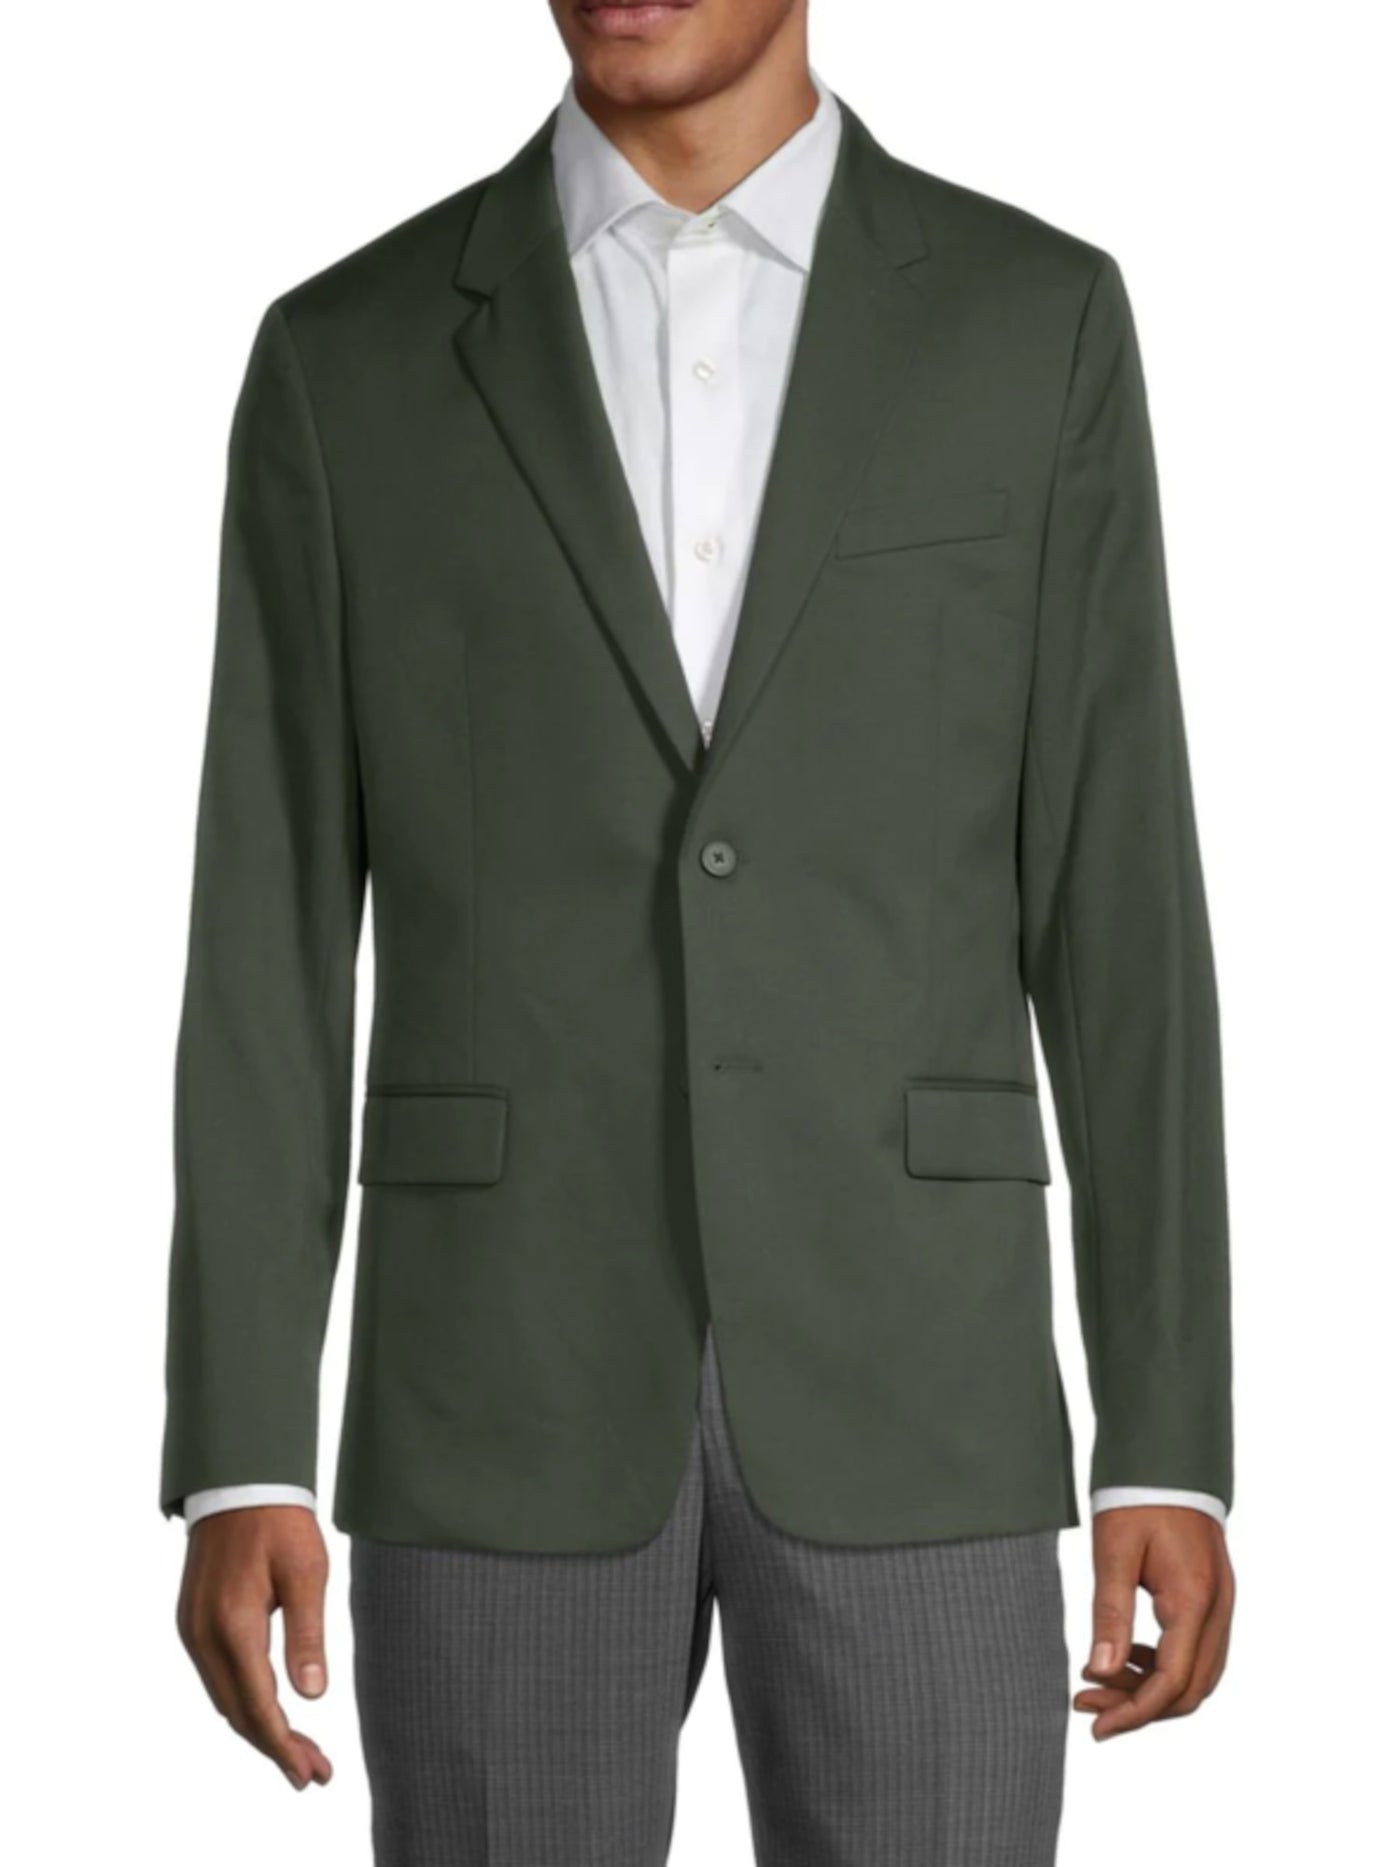 THEORY Mens Green Single Breasted, Wool Blend Suit Sport Coat 40S